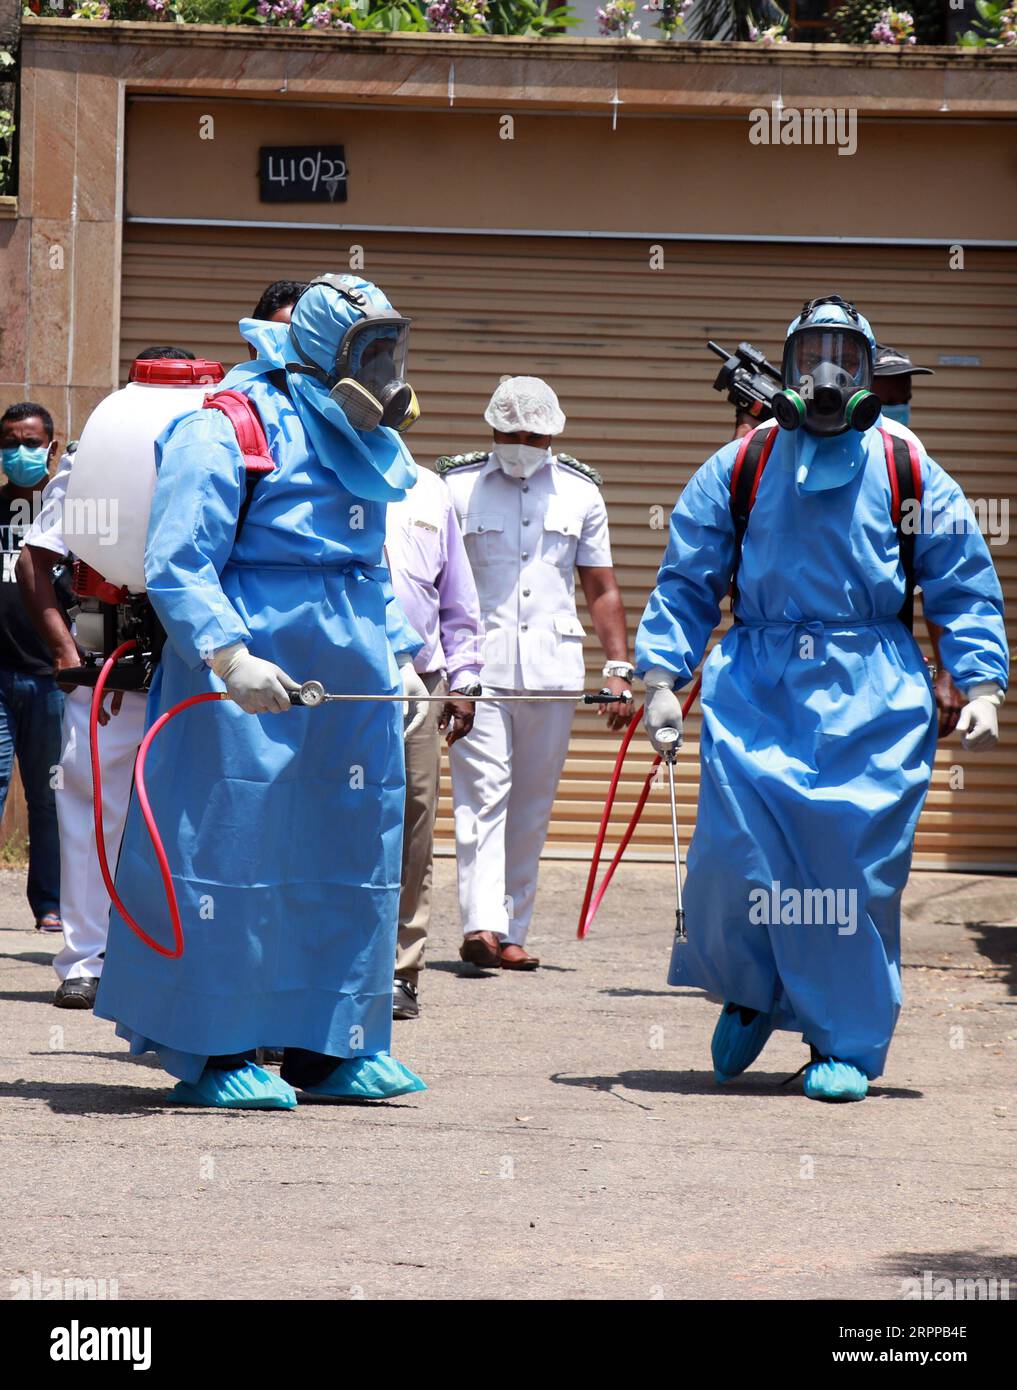 200314 -- COLOMBO, March 14, 2020 -- Health workers wearing protective suits spray disinfectant on a housing complex in Colombo, Sri Lanka, March 14, 2020. The number of confirmed cases of COVID-19 in Sri Lanka rose to 10 on Saturday evening with the latest being two females aged 56 and 17 years old, the Health Ministry said in a statement here. All the patients are currently receiving treatment at the Infectious Disease Hospital on the outskirts of the capital and the Polonnaruwa Hospital in north central Sri Lanka. Photo by /Xinhua SRI LANKA-COLOMBO-COVID-19 AjithxPerera PUBLICATIONxNOTxINxC Stock Photo